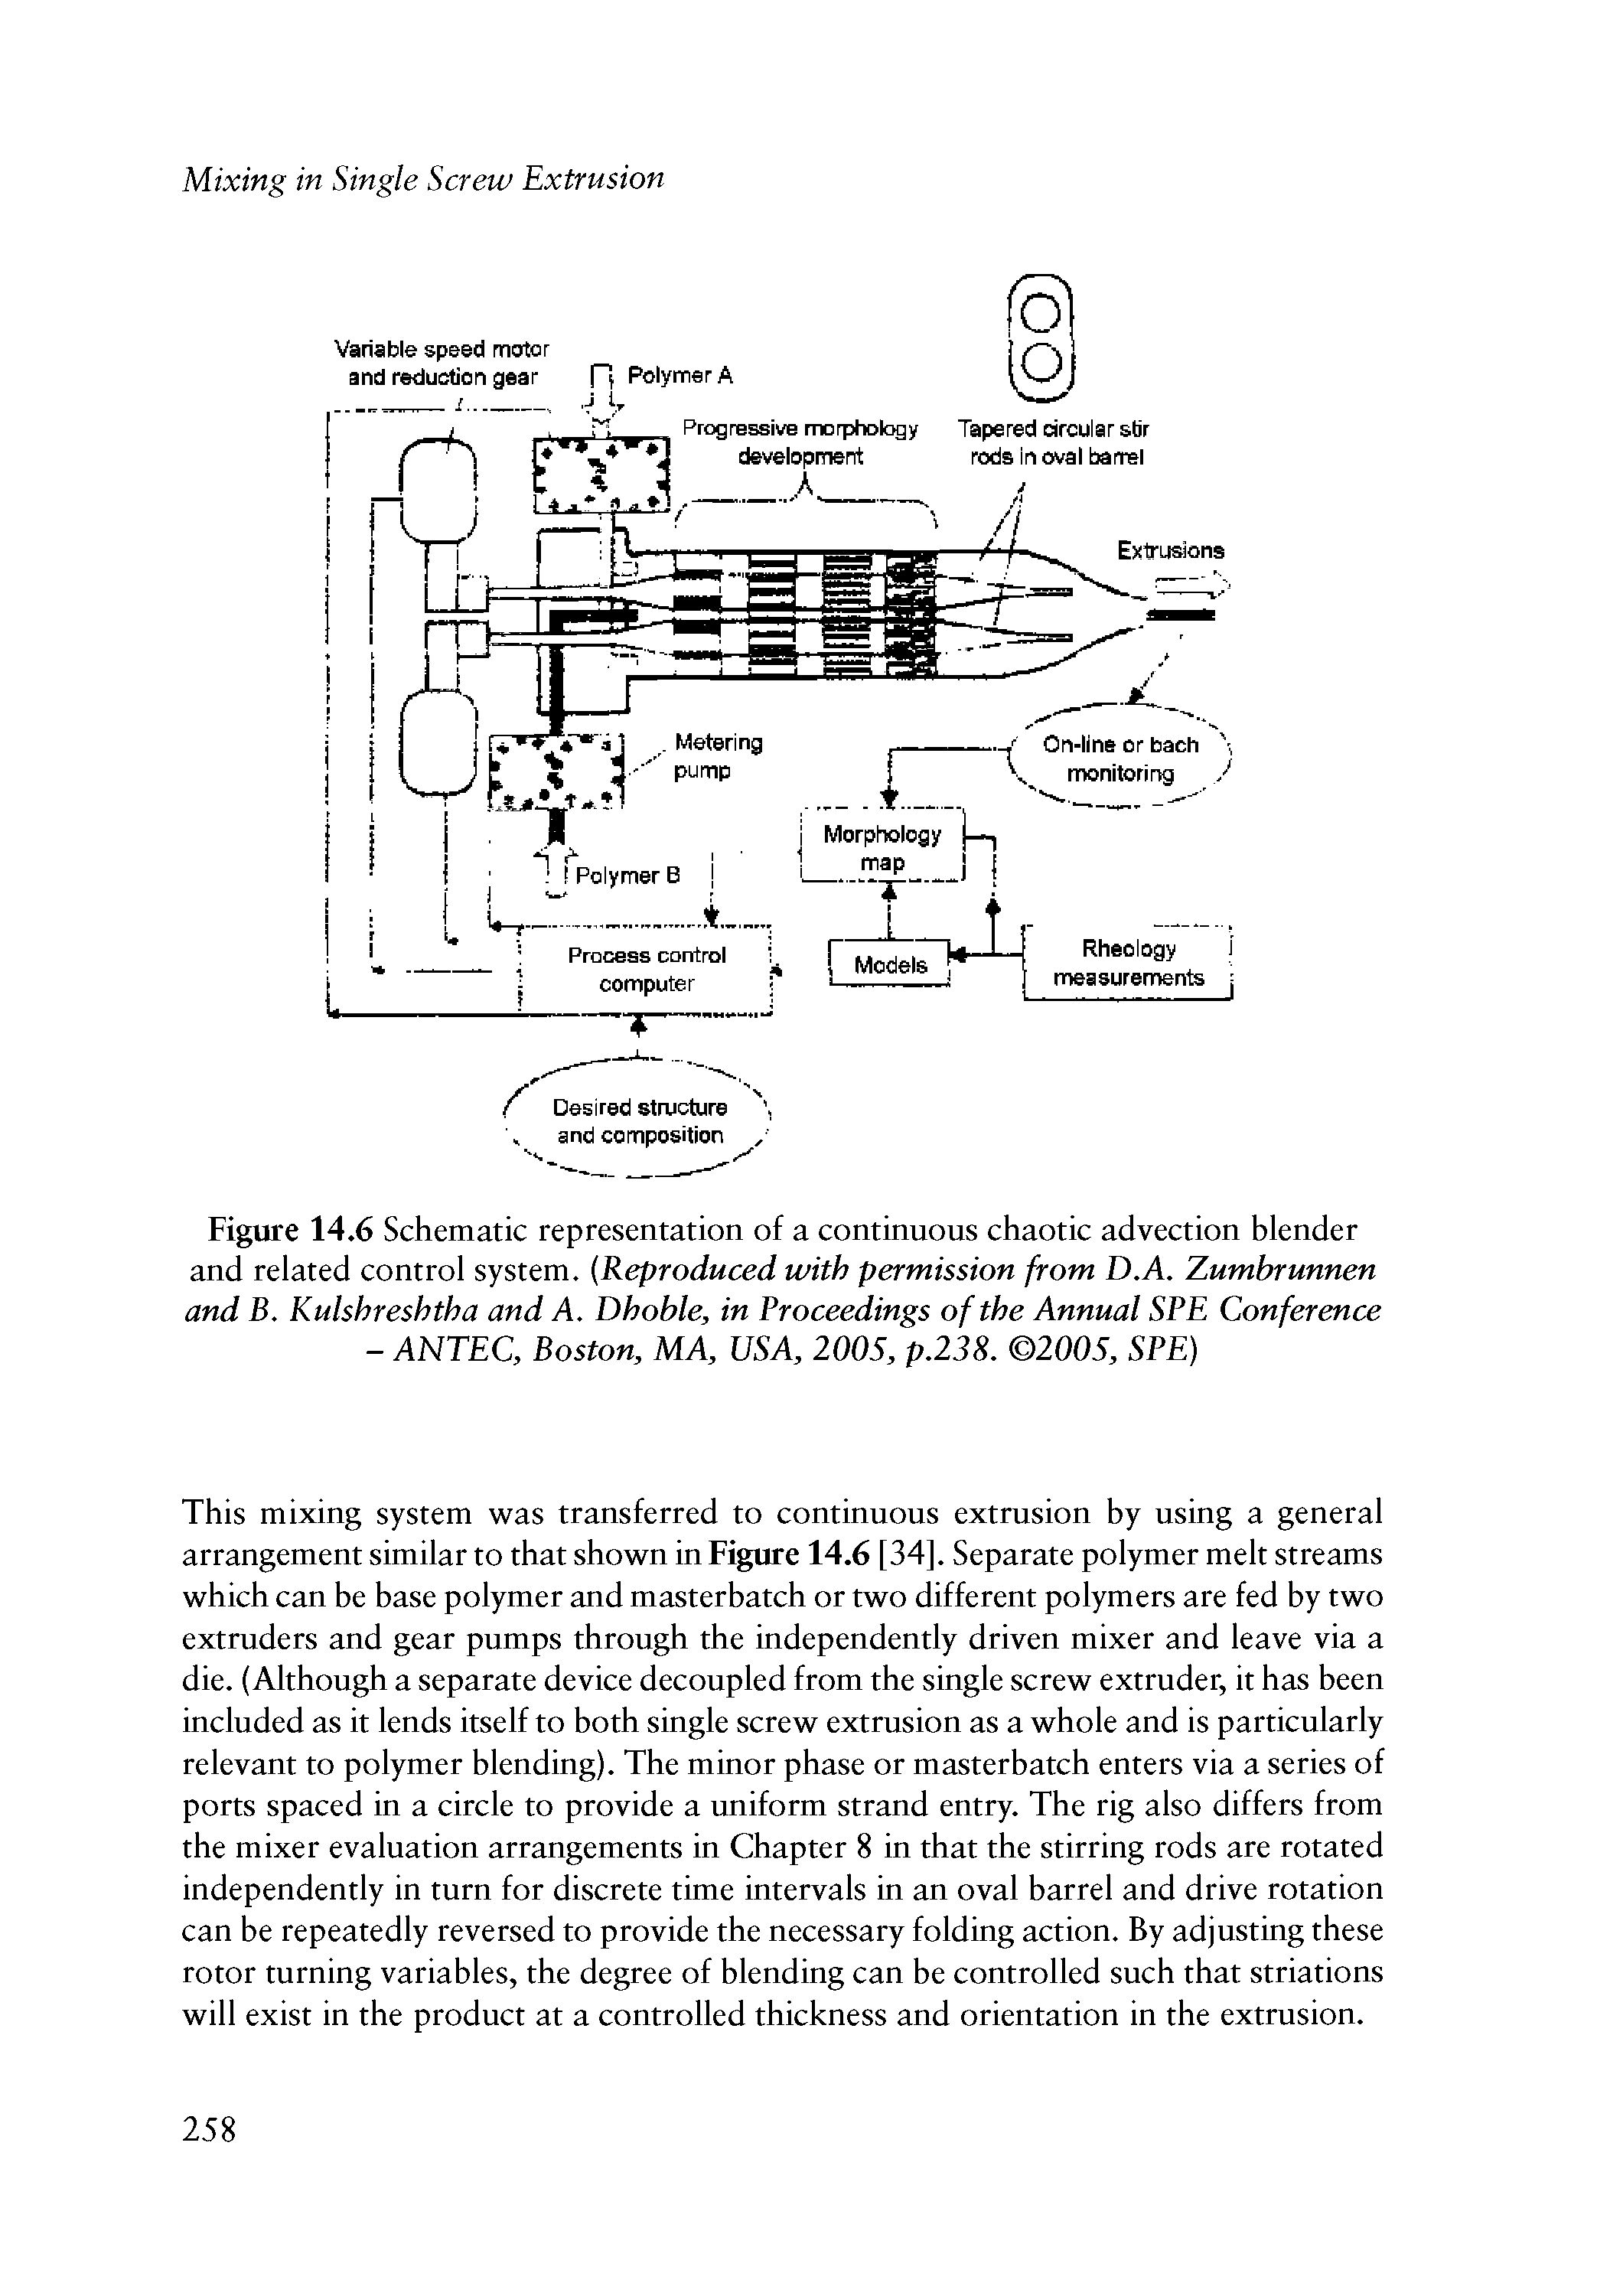 Figure 14.6 Schematic representation of a continuous chaotic advection blender and related control system. Reproduced with permission from D.A. Zumbrunnen and B. Kulshreshtha and A. Dhoble, in Proceedings of the Annual SPE Conference - ANTEC, Boston, MA, USA, 2005, p.238. 2005, SPE)...